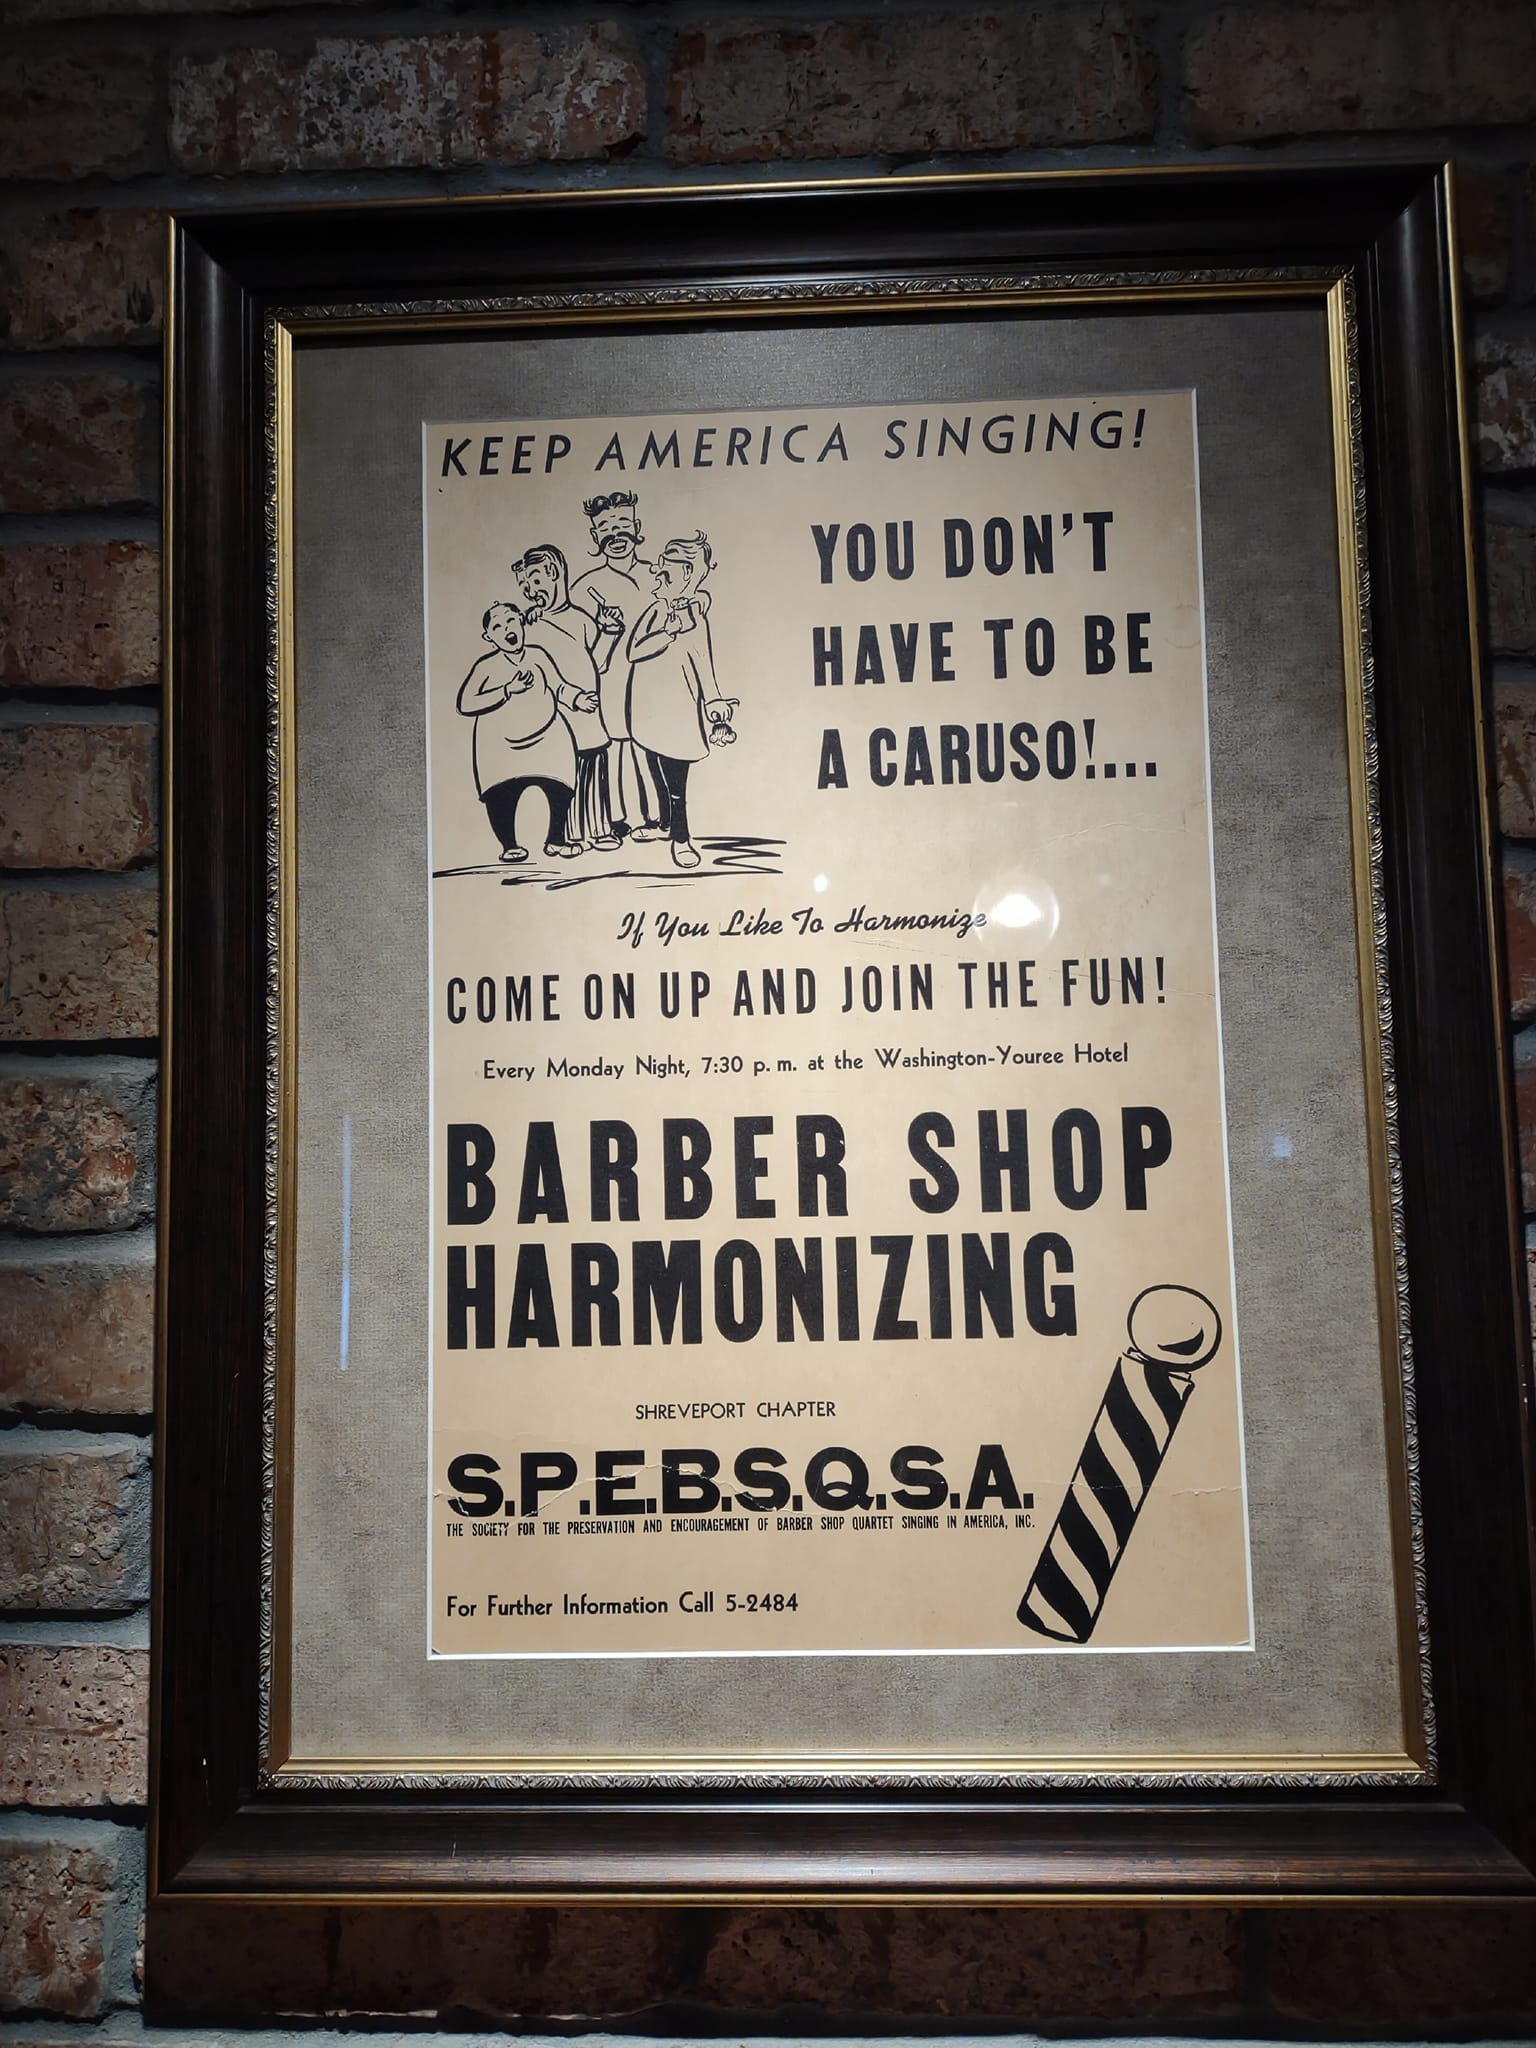 Text on old poster: ““KEEP AMERICA SINGING! • YOU DON'T HAVE TO BE A CARUSO!… • If You Like To Harmonize • COME ON UP AND JOIN THE FUN! • Every Monday Night, 7:30 ㏘ at the Washington-Youree Hotel • BARBER SHOP HARMONIZING • Shreveport Chapter • S.P.E.B.S.Q.S.A. • The Society for the Preservation and Encouragement of Barber Shop Quartet Singng in America, Inc. • For Further Information Call 5-2484”